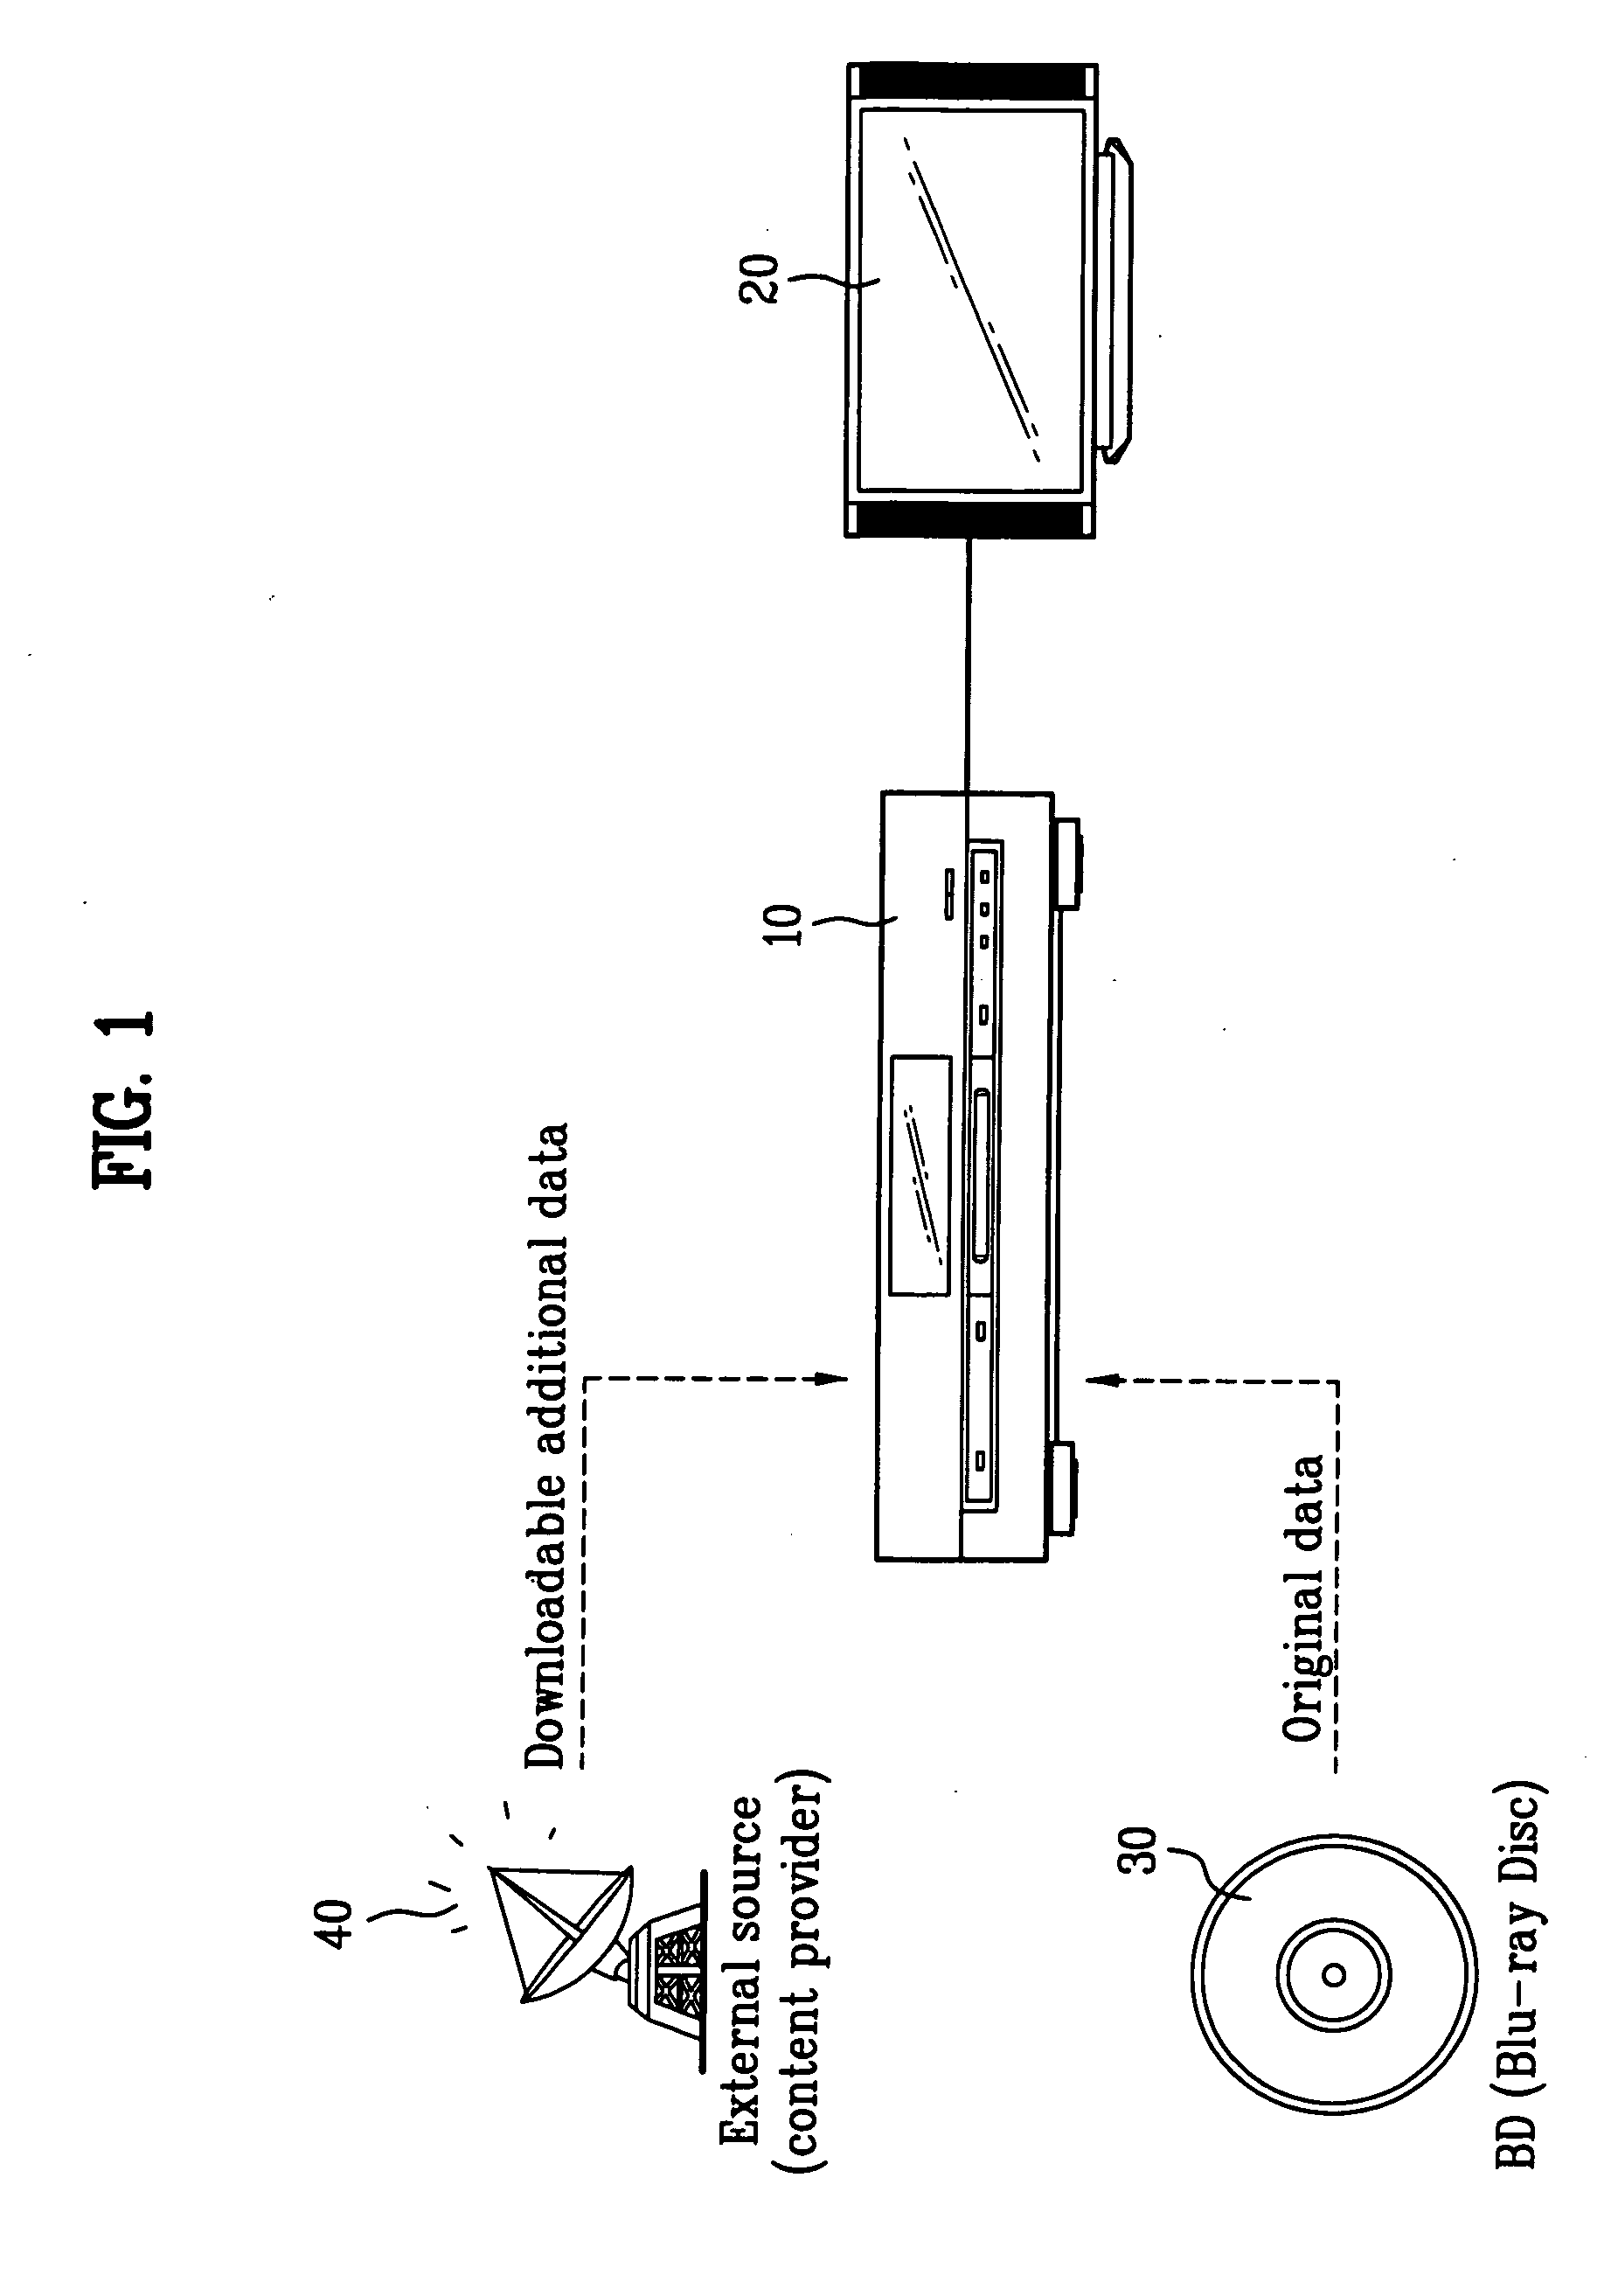 Recording medium, and method and apparatus for reproducing data from the recording medium